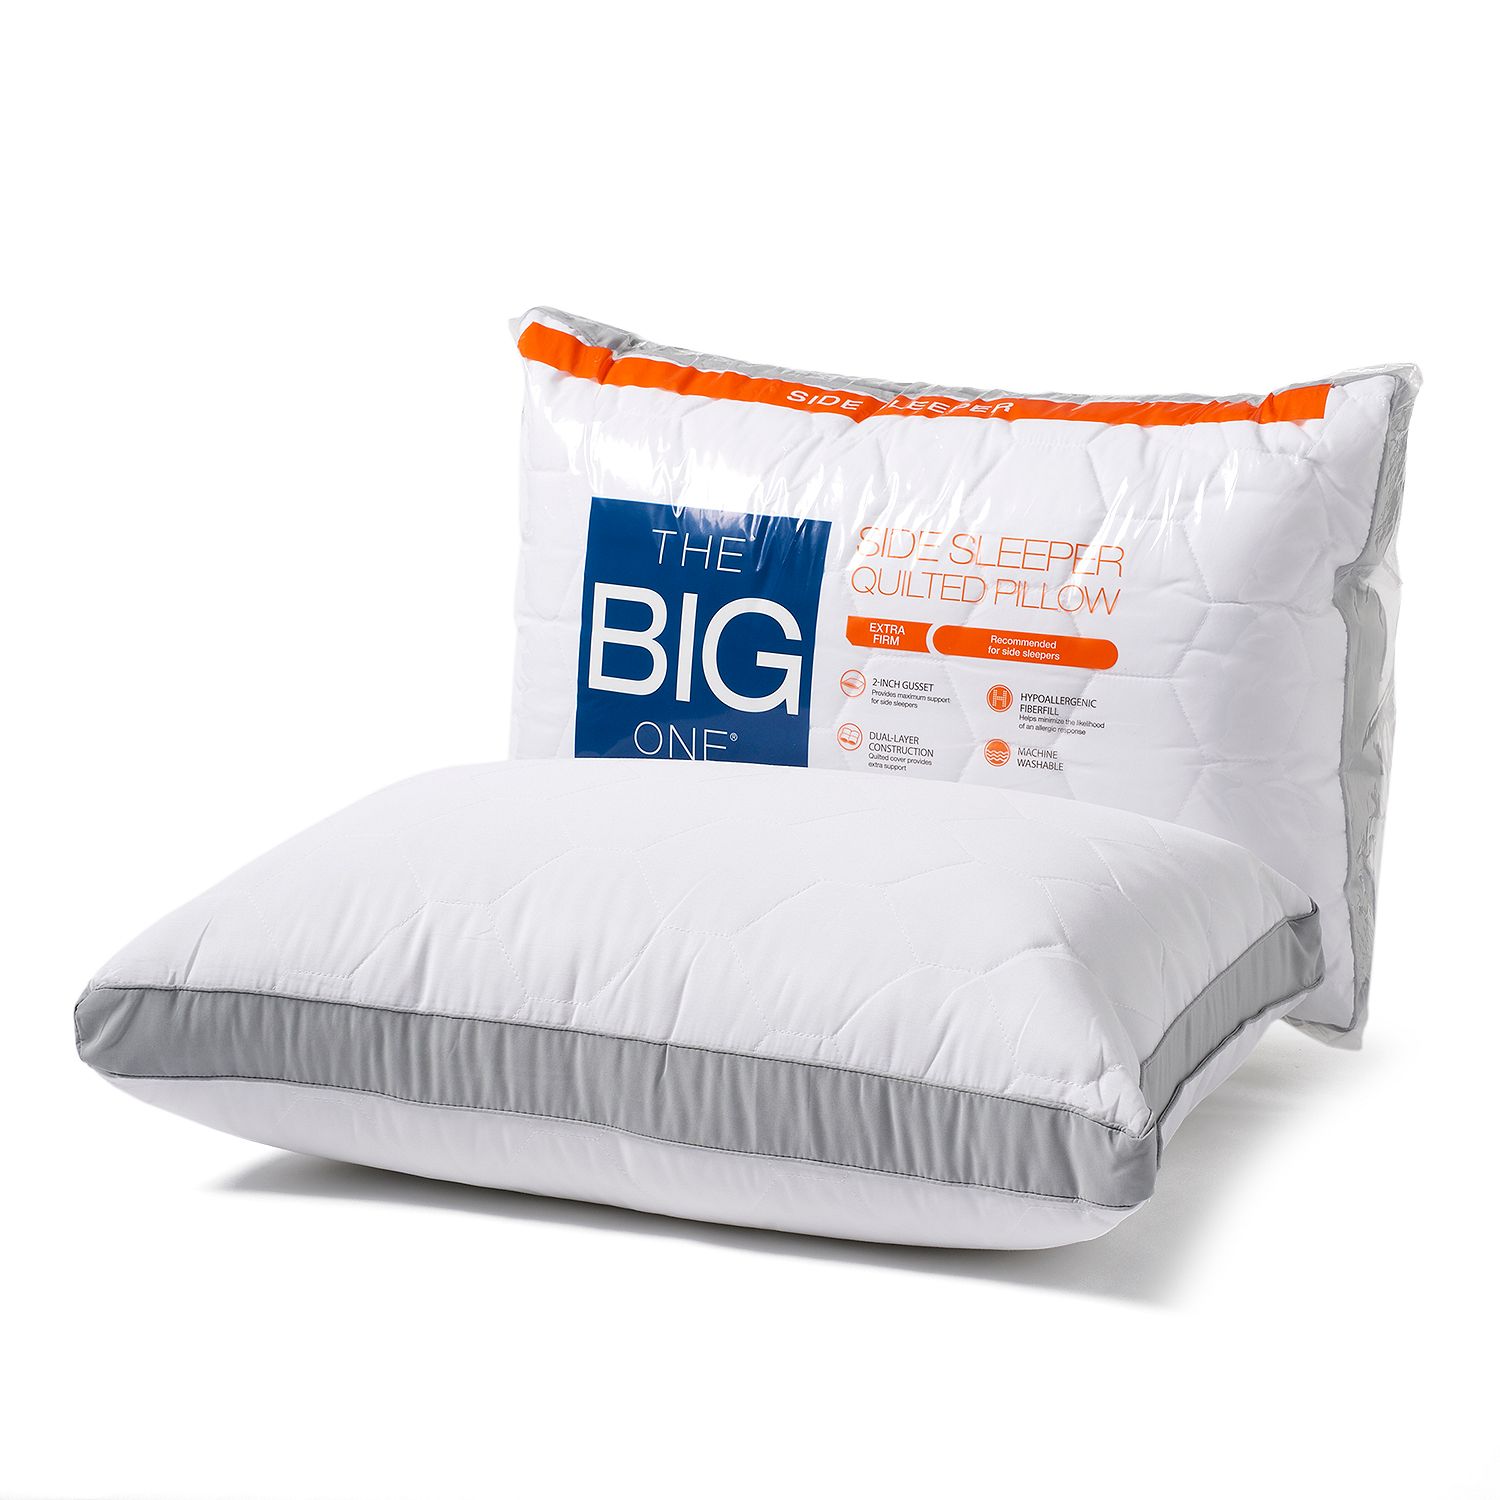 Photo 1 of The Big One® Quilted Side Sleeper Bed Pillow